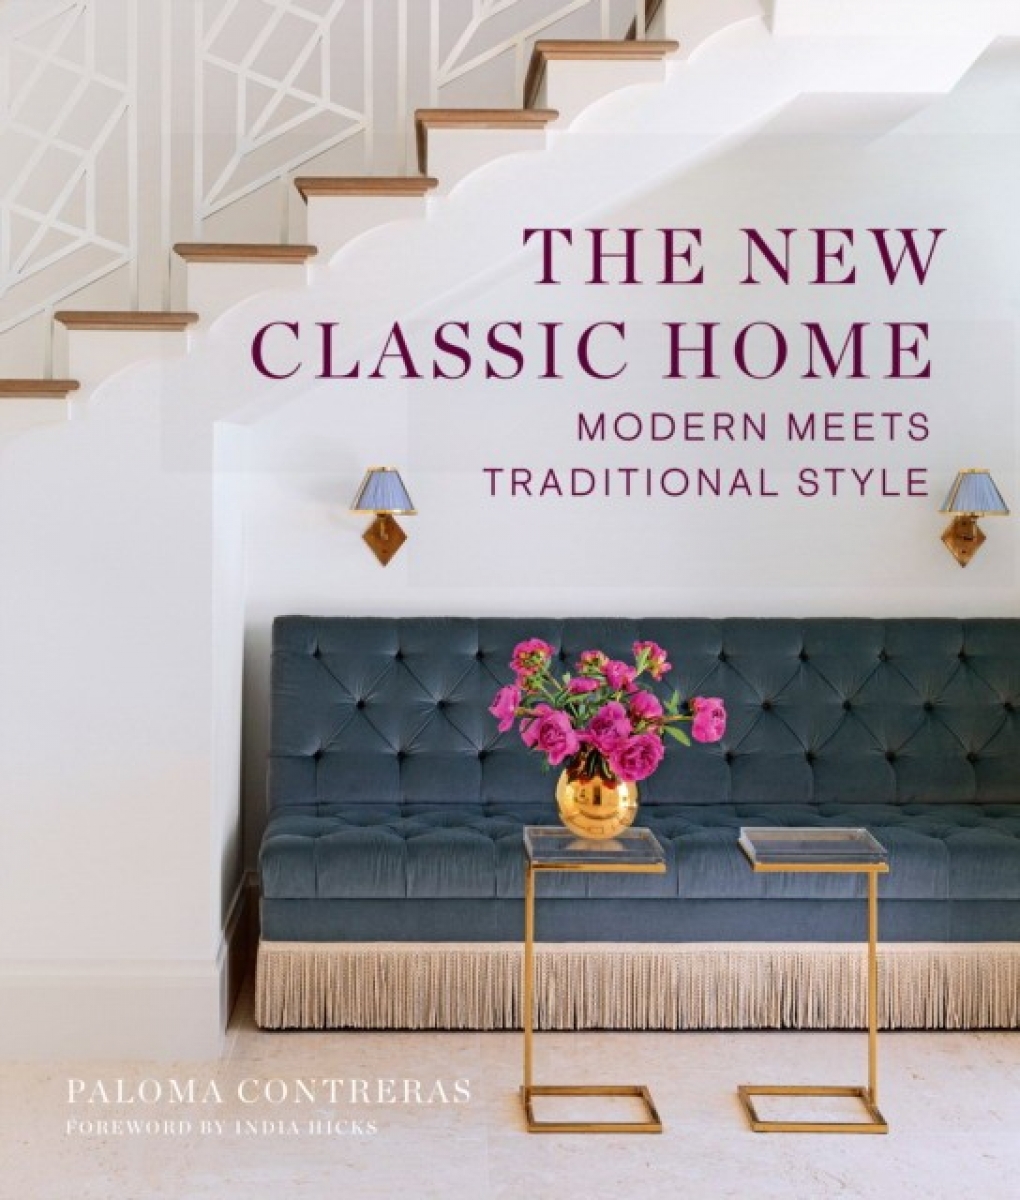 Contreras, Paloma The New Classic Home: Modern Meets Traditional Style 